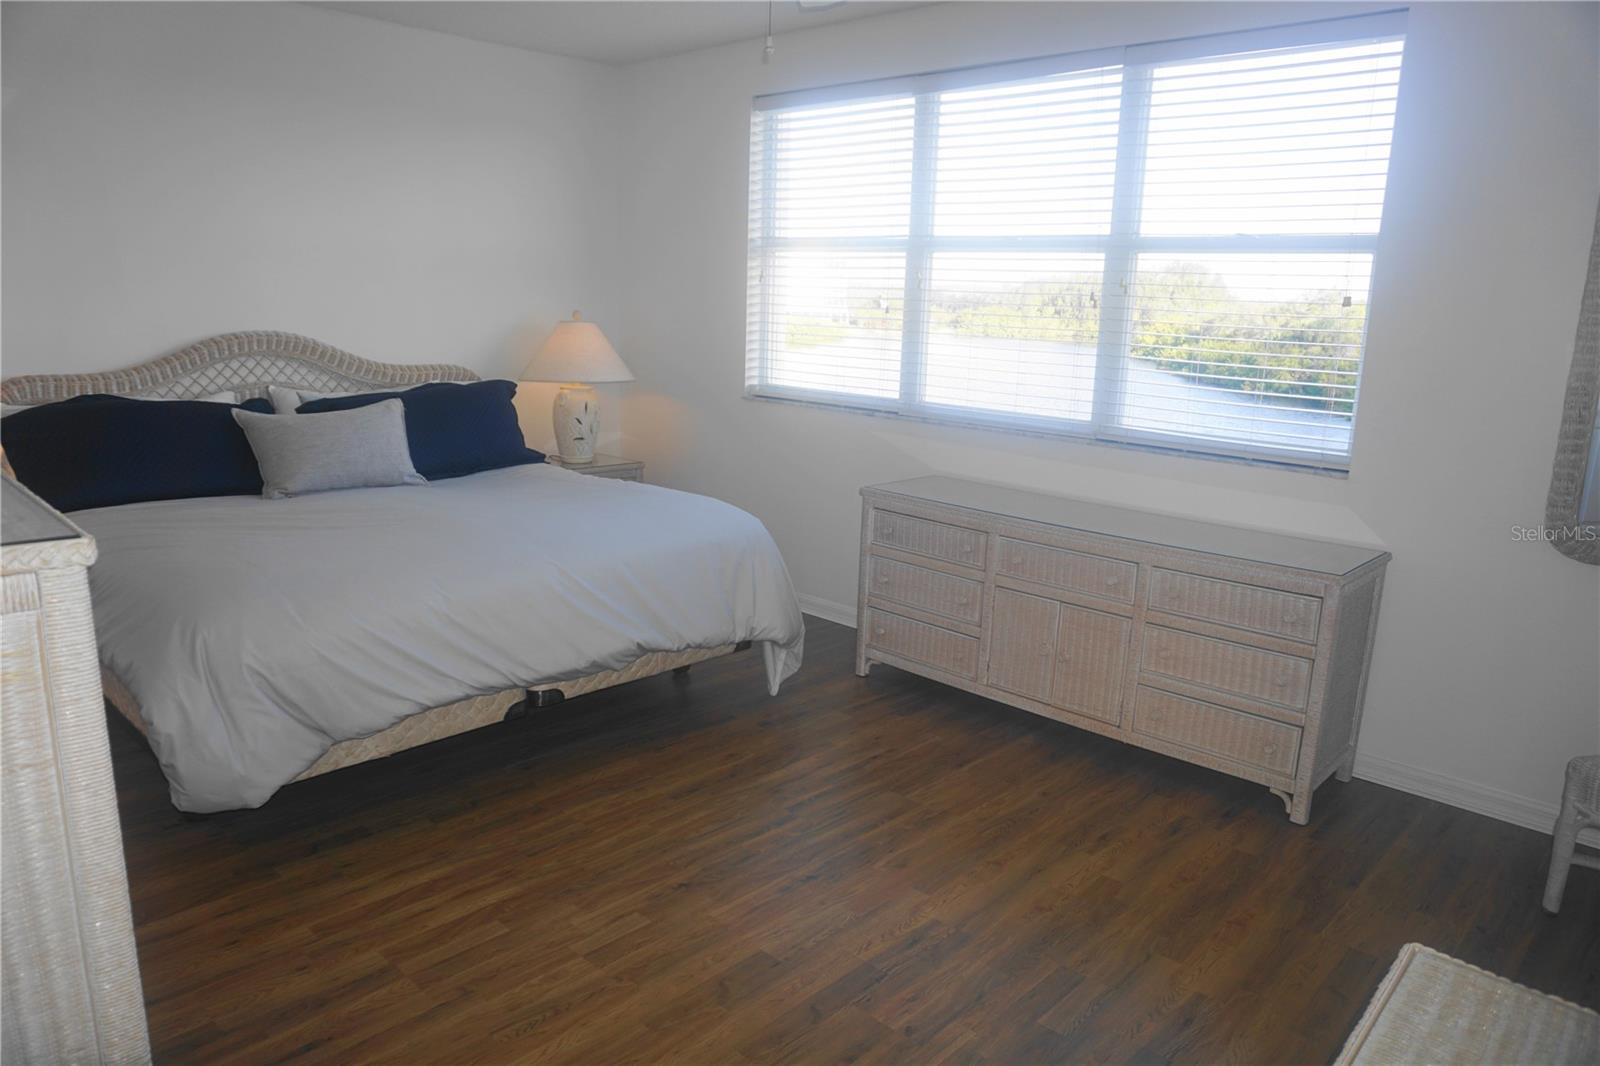 The large primary bedroom also offers great water views!